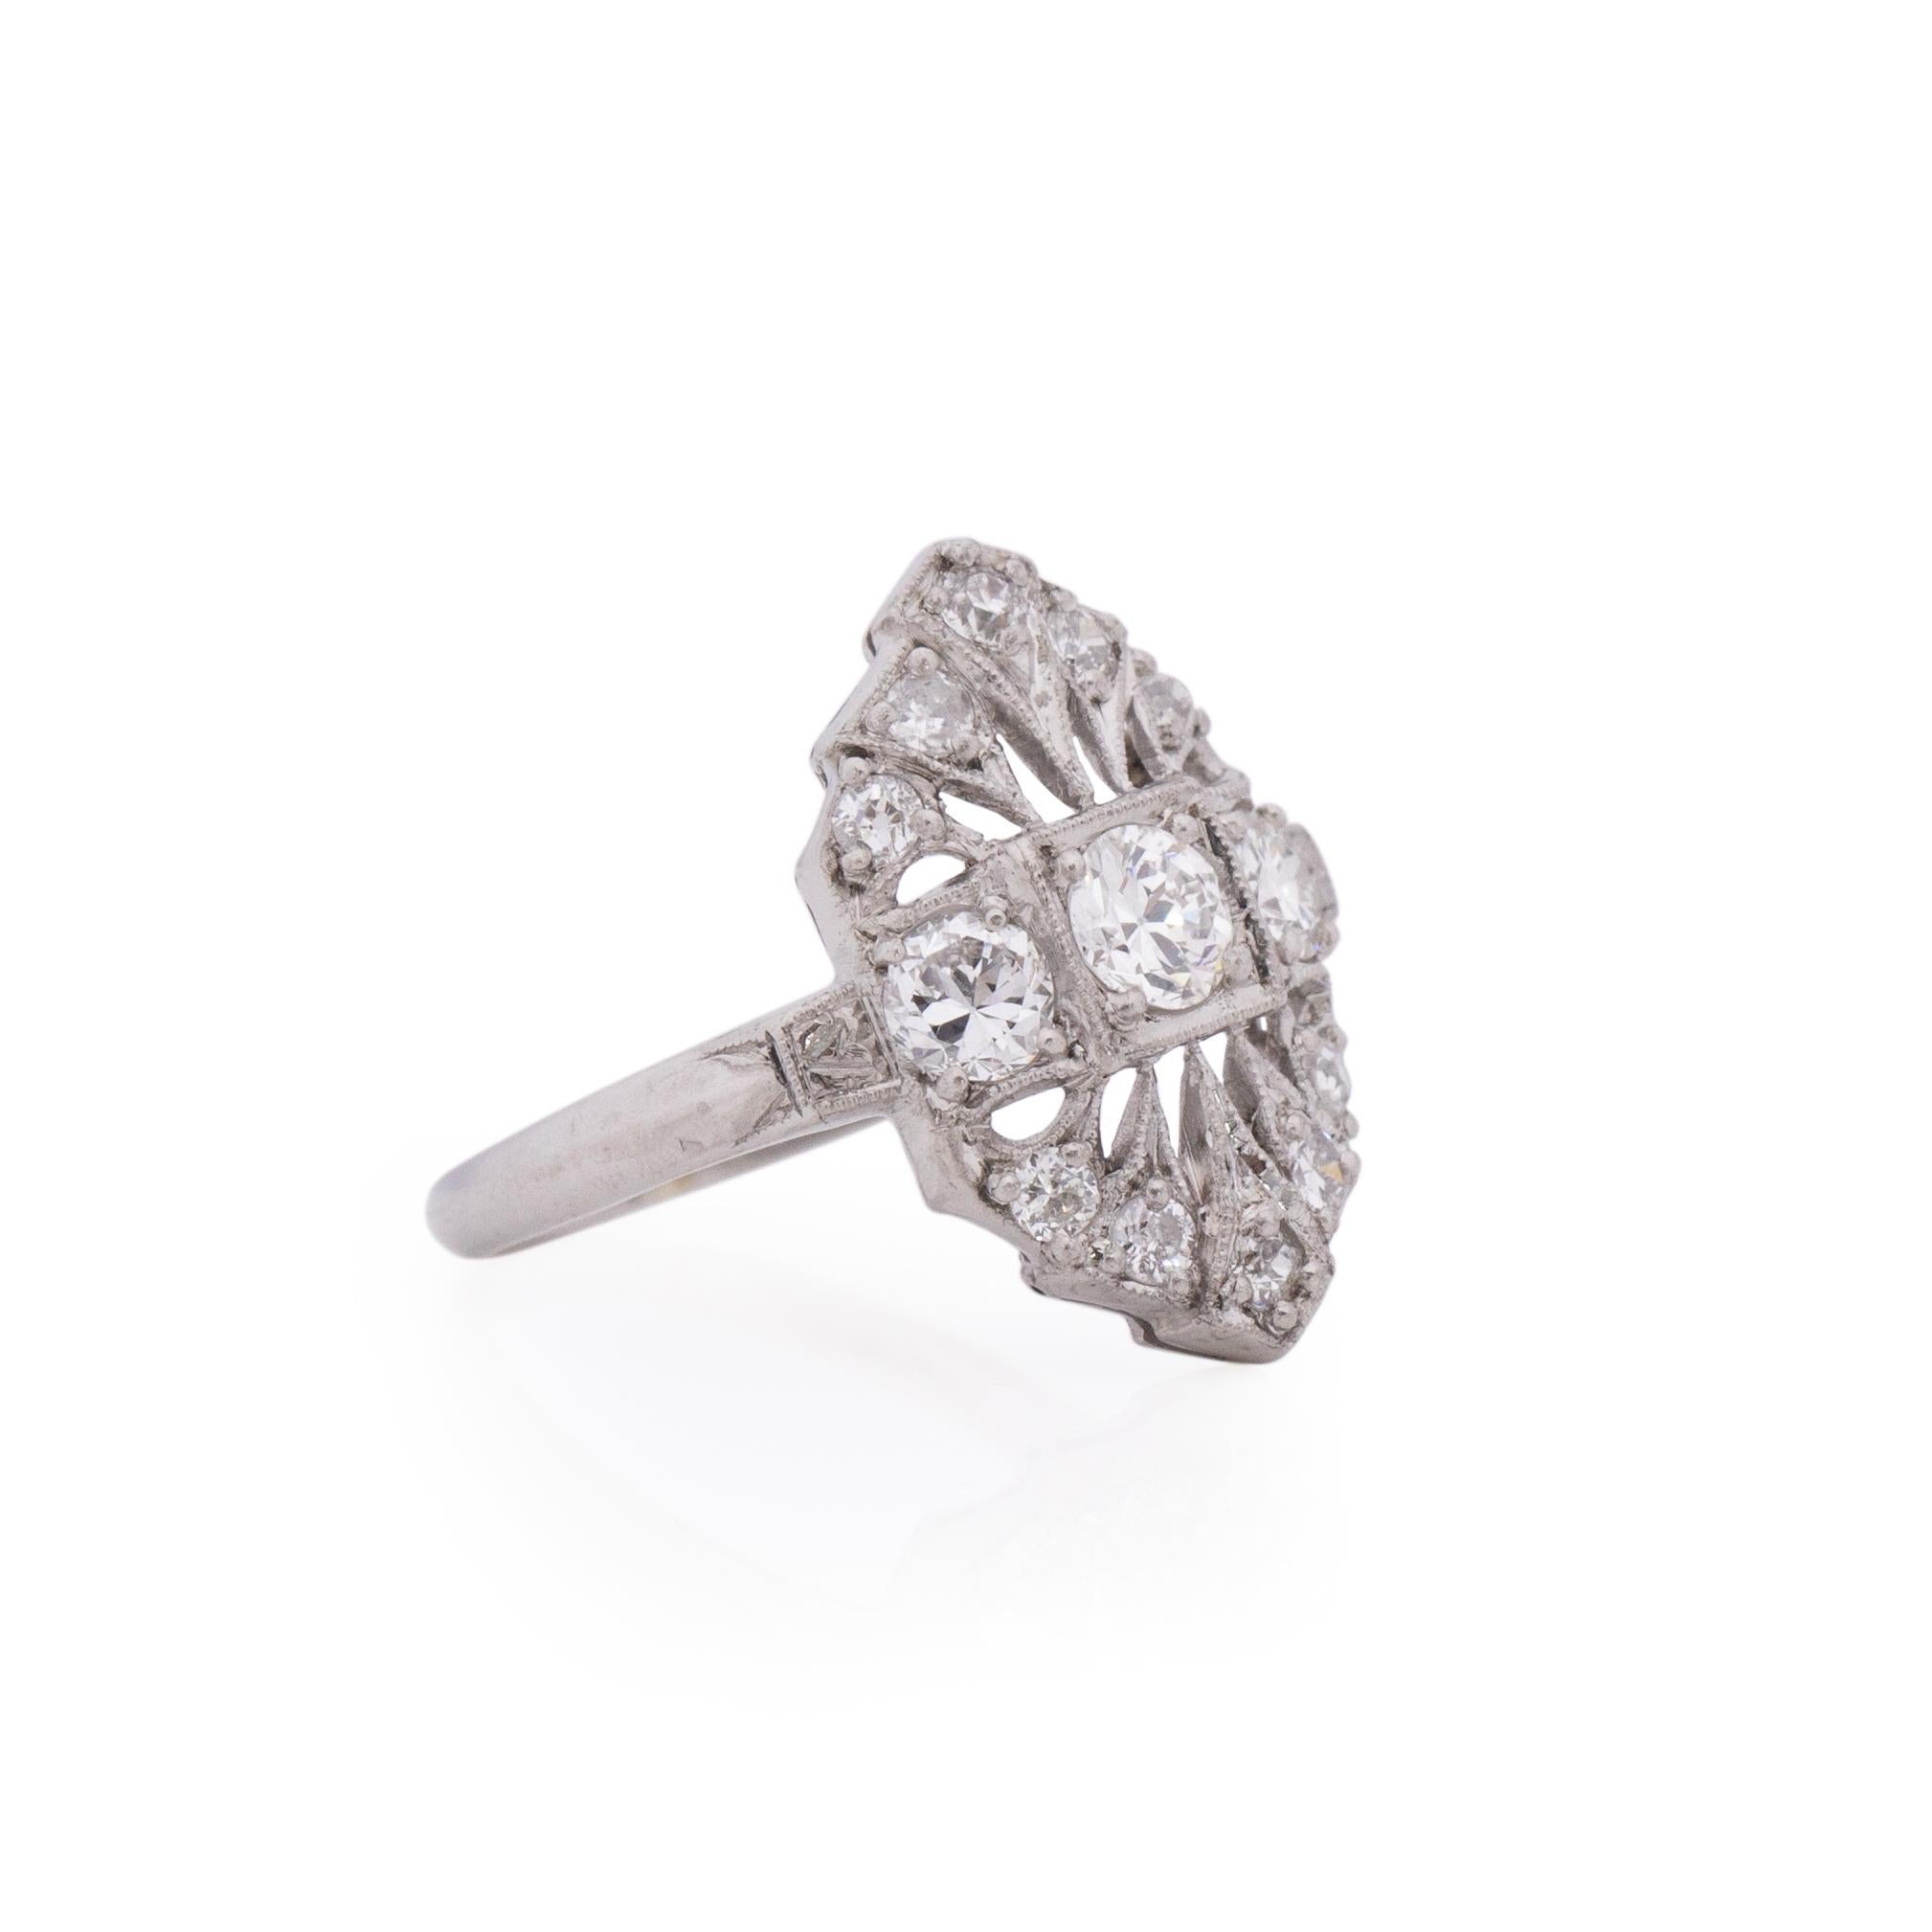 A sweet little shield ring with a big vintage feel, this Edwardian ring has a beautiful flapper feel. The two arches at the top and the bottom of the three center stones give the ring length and outstanding detail. The three center diamonds are